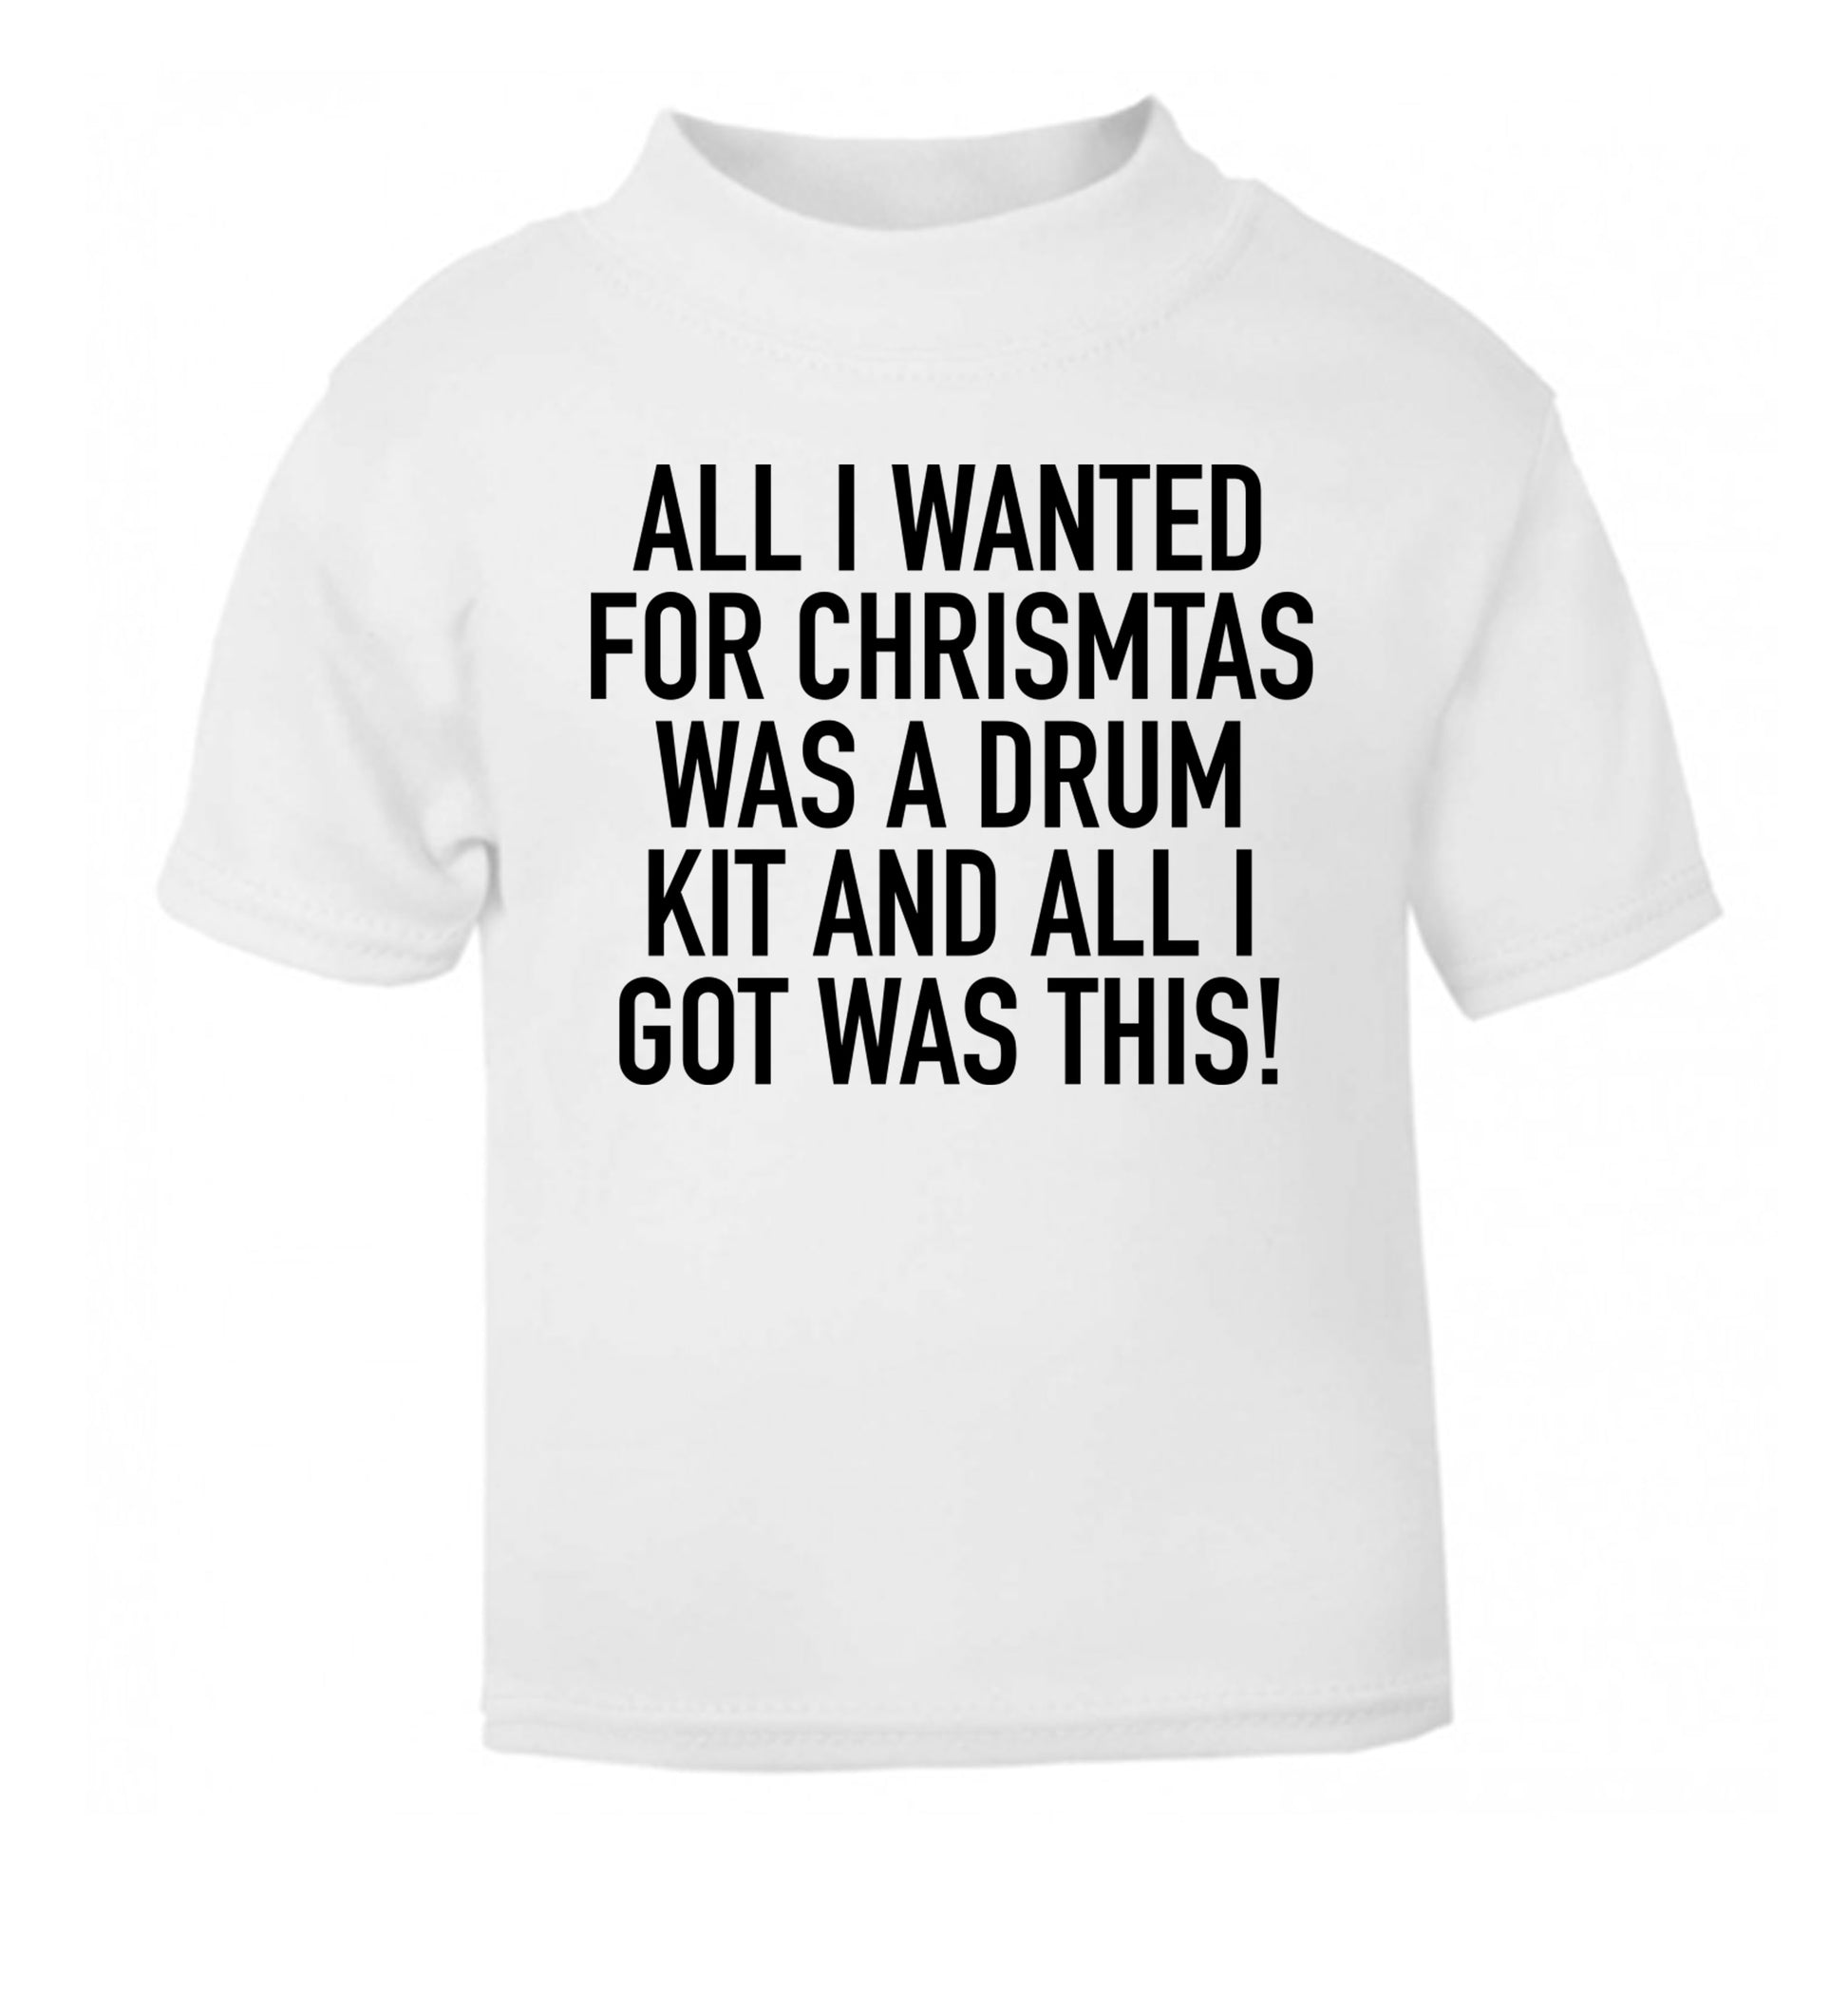 All I wanted for Christmas was a drum kit and all I got was this! white Baby Toddler Tshirt 2 Years